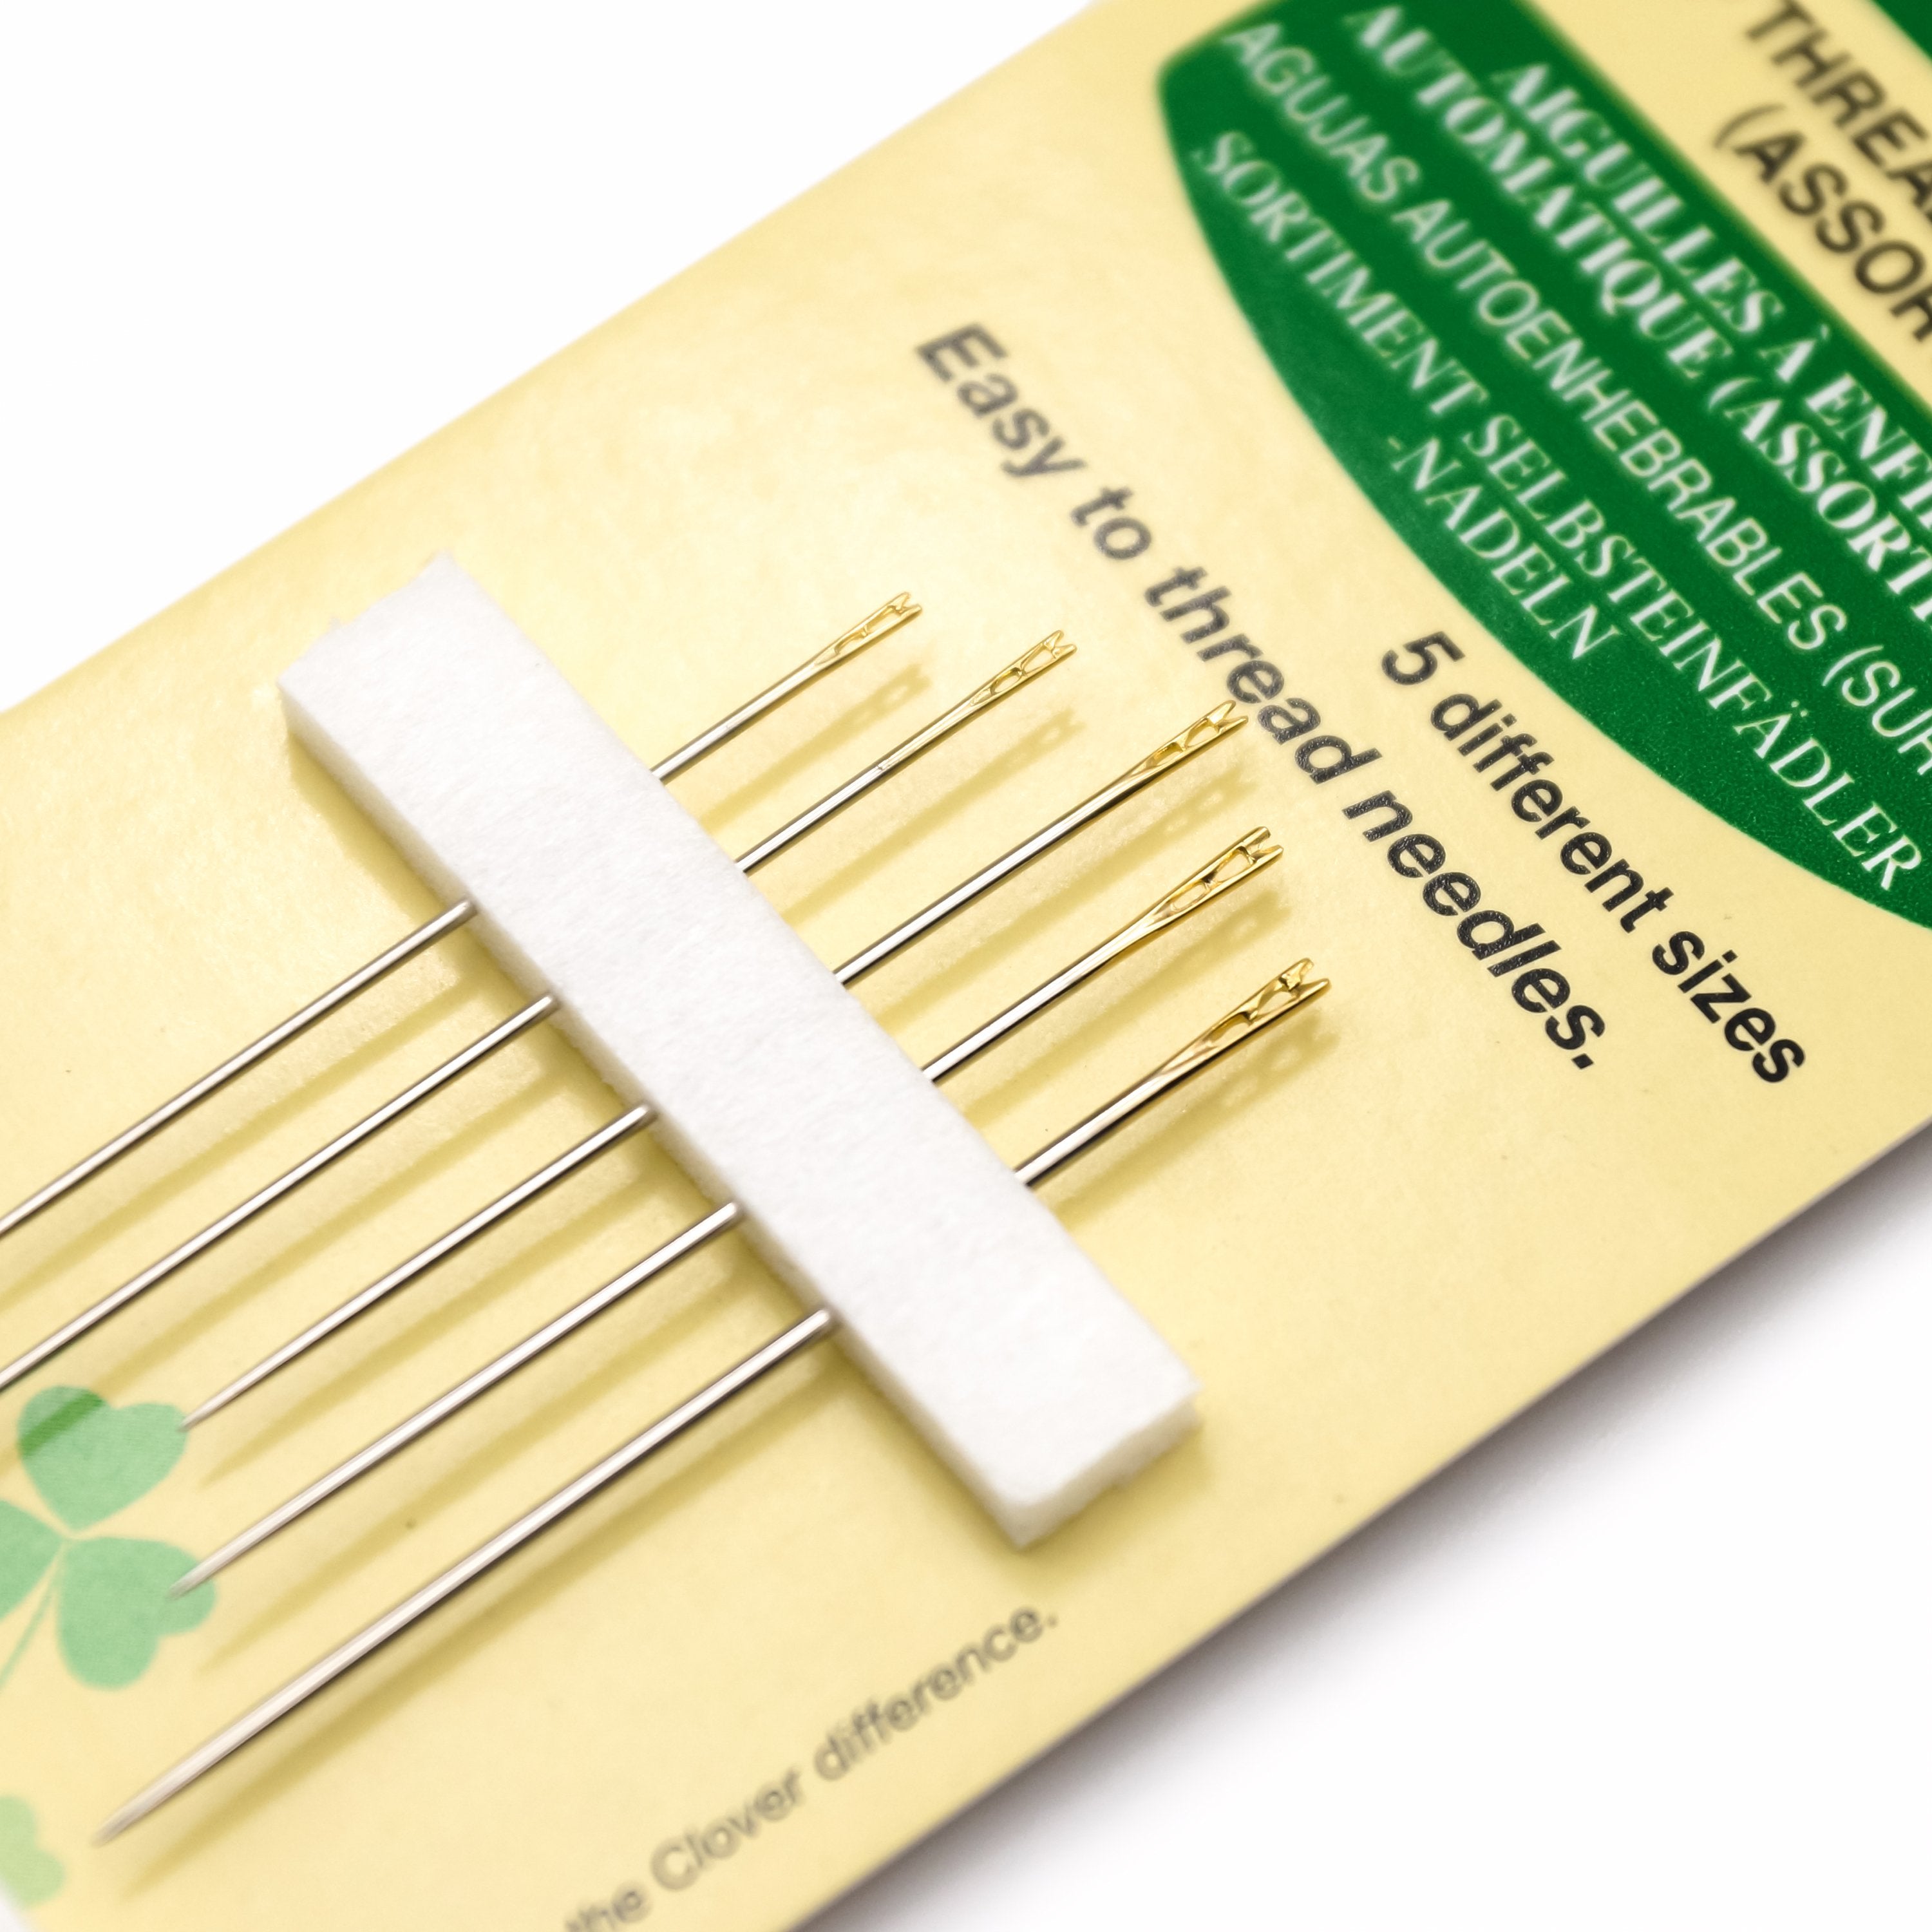 2/5Pack Stainless Steel Self Threading Needles Hand Sewing Needles